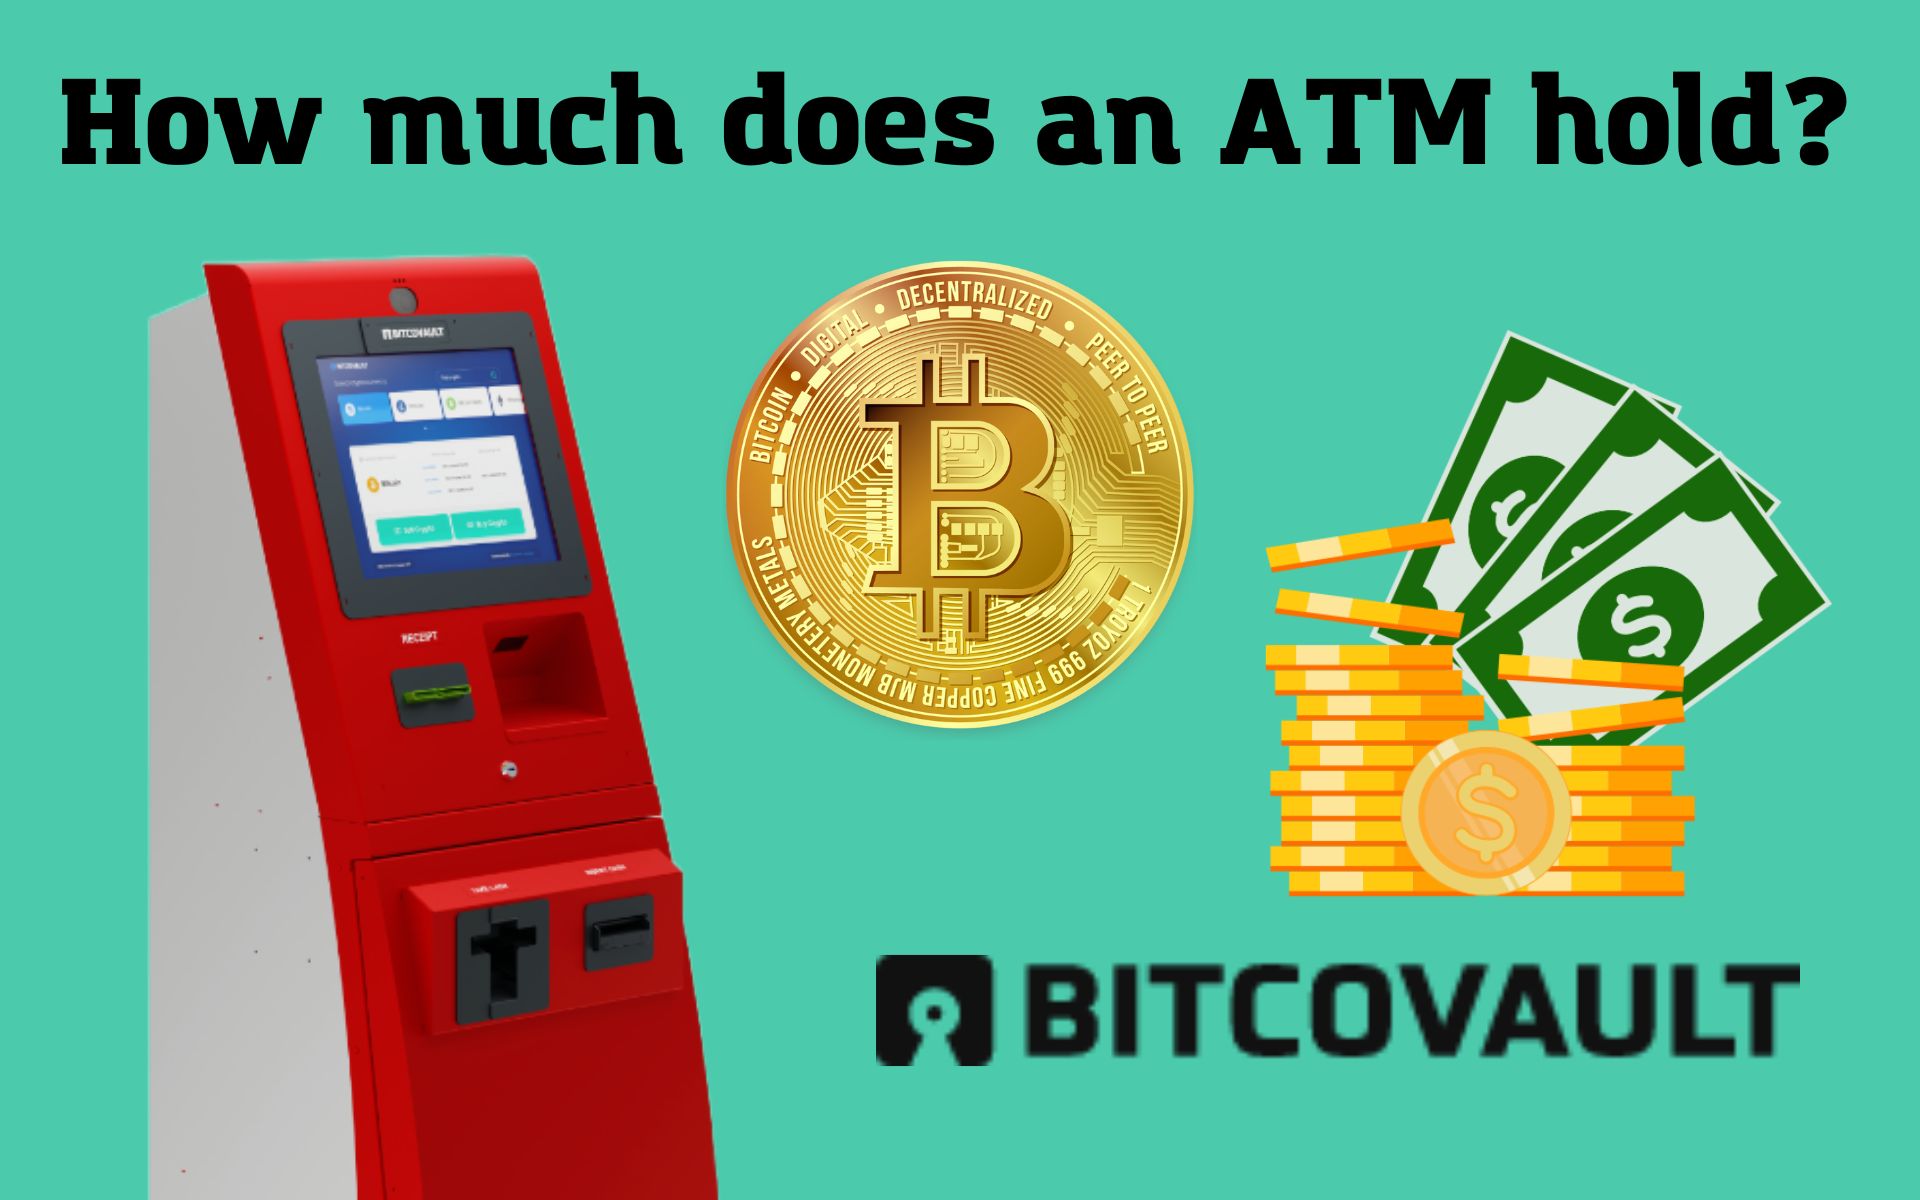 How much does an ATM hold?